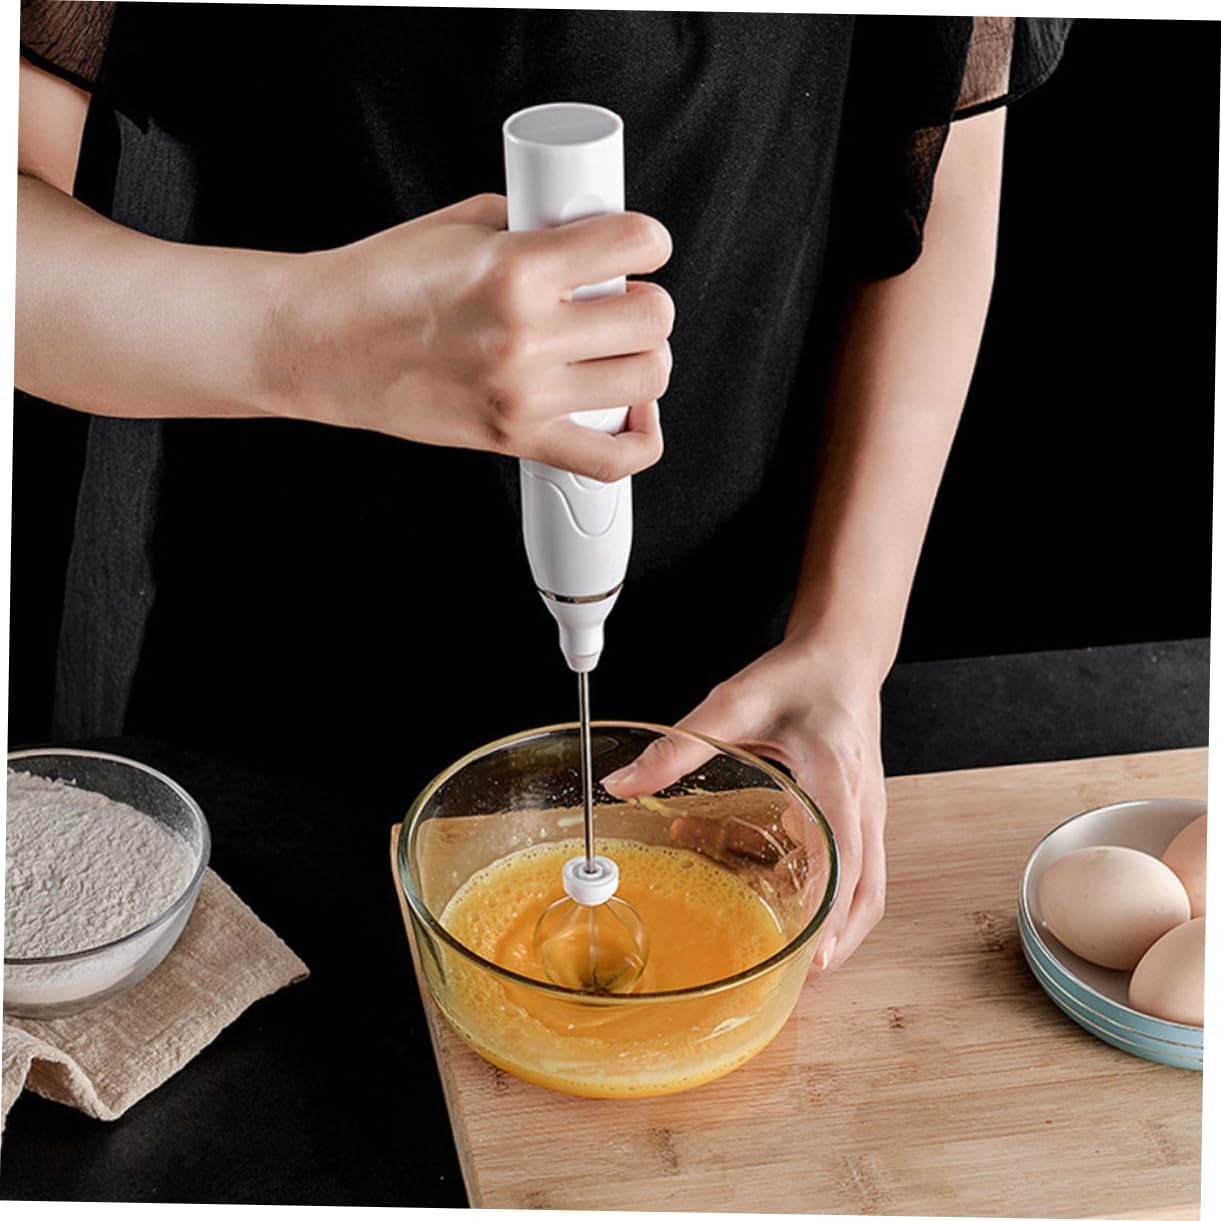 Cabilock Electric Egg Beater Electric Milk Frother Blenders Milk Foam Mixer Cake Mini Mixer Blender Coffee Stirrer Food Stand Mixer Hand Mixer Stainless Steel Household Baking Tools White  Cabilock   